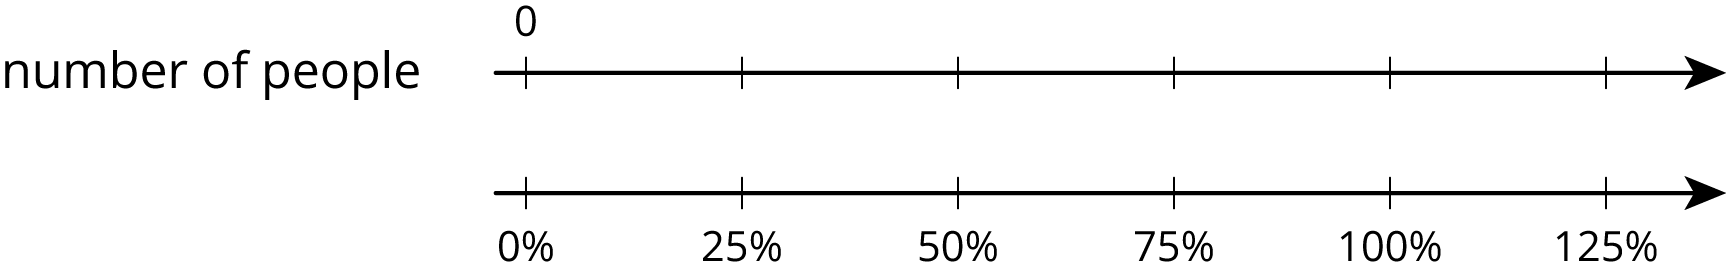 A double number line for "number of people" with 6 evenly spaced tick marks. For the top number line, the number 0 is on the first tick mark and the remaining tick marks are blank. For the bottom number line, starting with the first tick mark, the percentages 0%, 25%, 50%, 75%, 100%, and 125% are labeled.